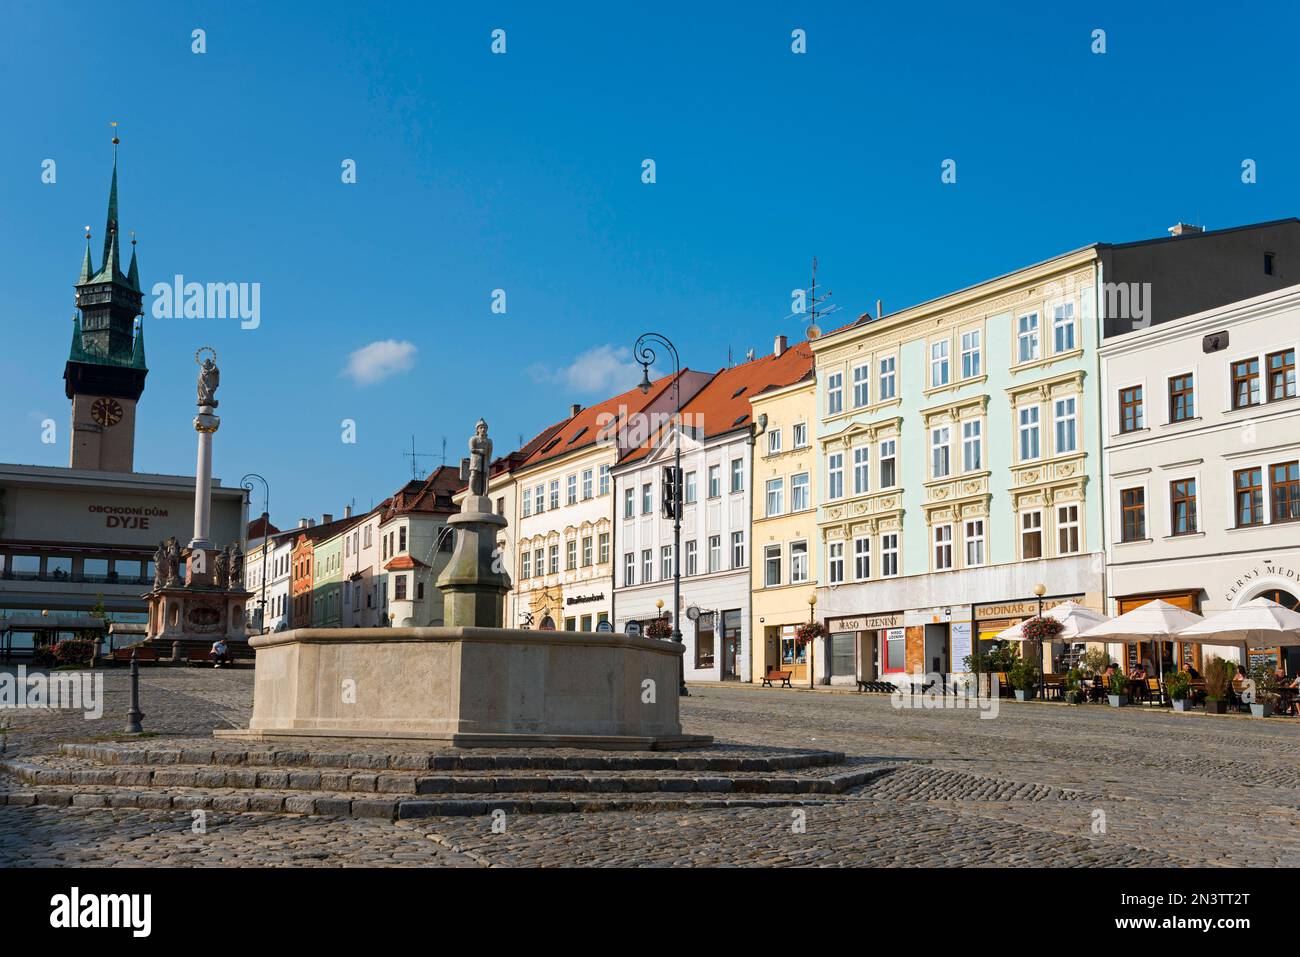 Town Hall Tower, Plague Column, Fountain with a Statue of Roland the Knight and Houses on Masaryk Square, Old Town, Znojmo, Znaim, Okres Znojmo, Kraj Stock Photo